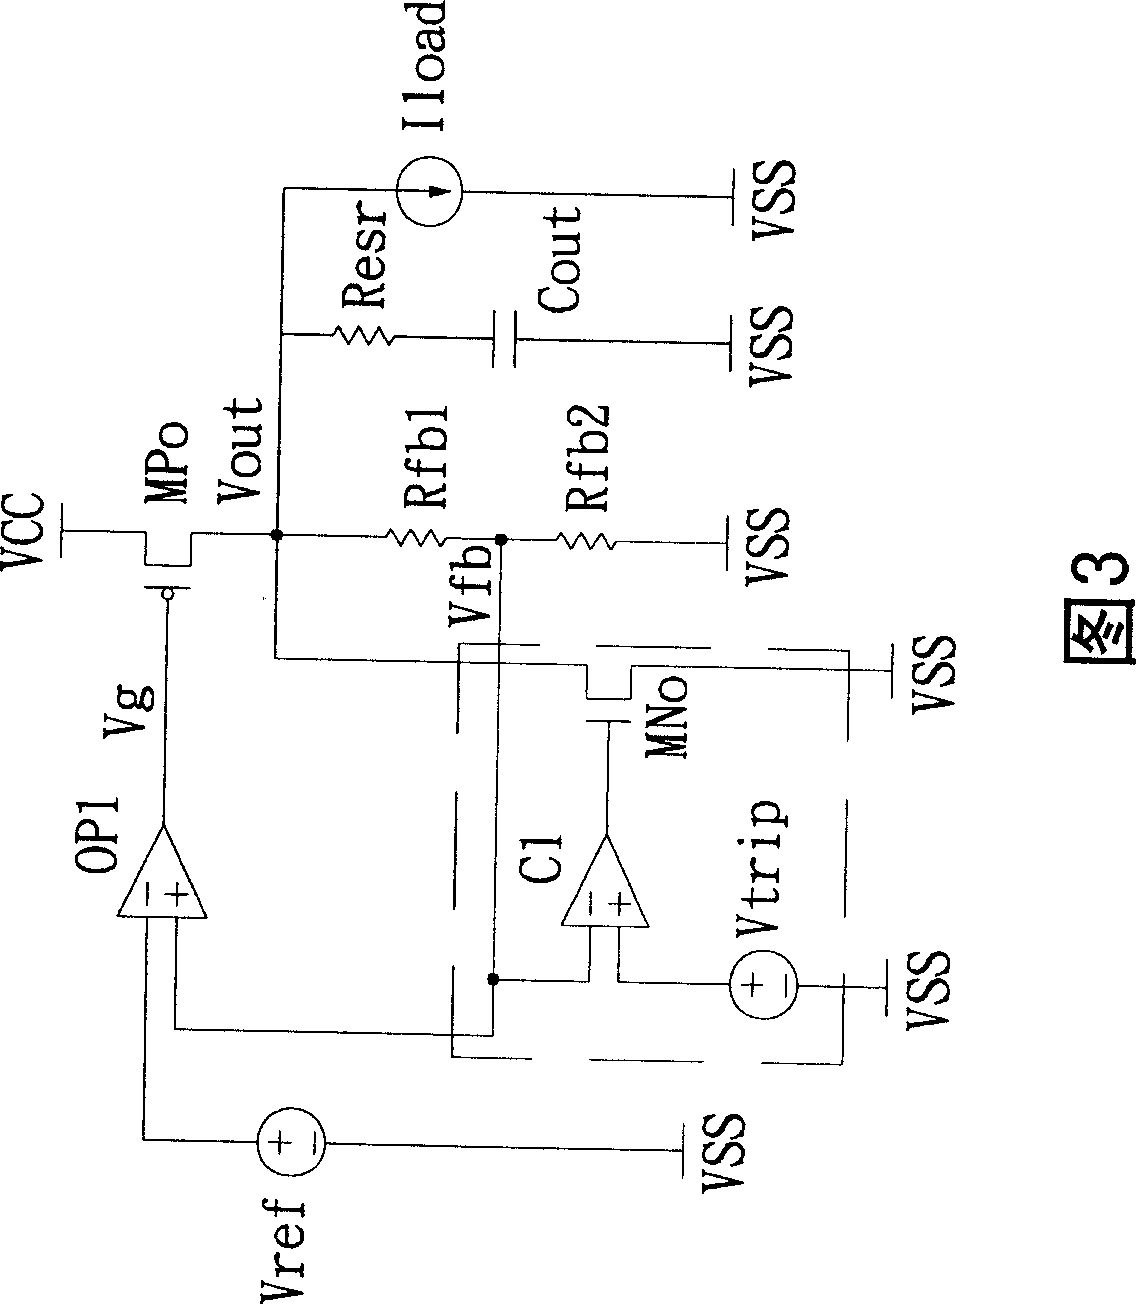 Voltage stabilizer comprising accelerated return for output